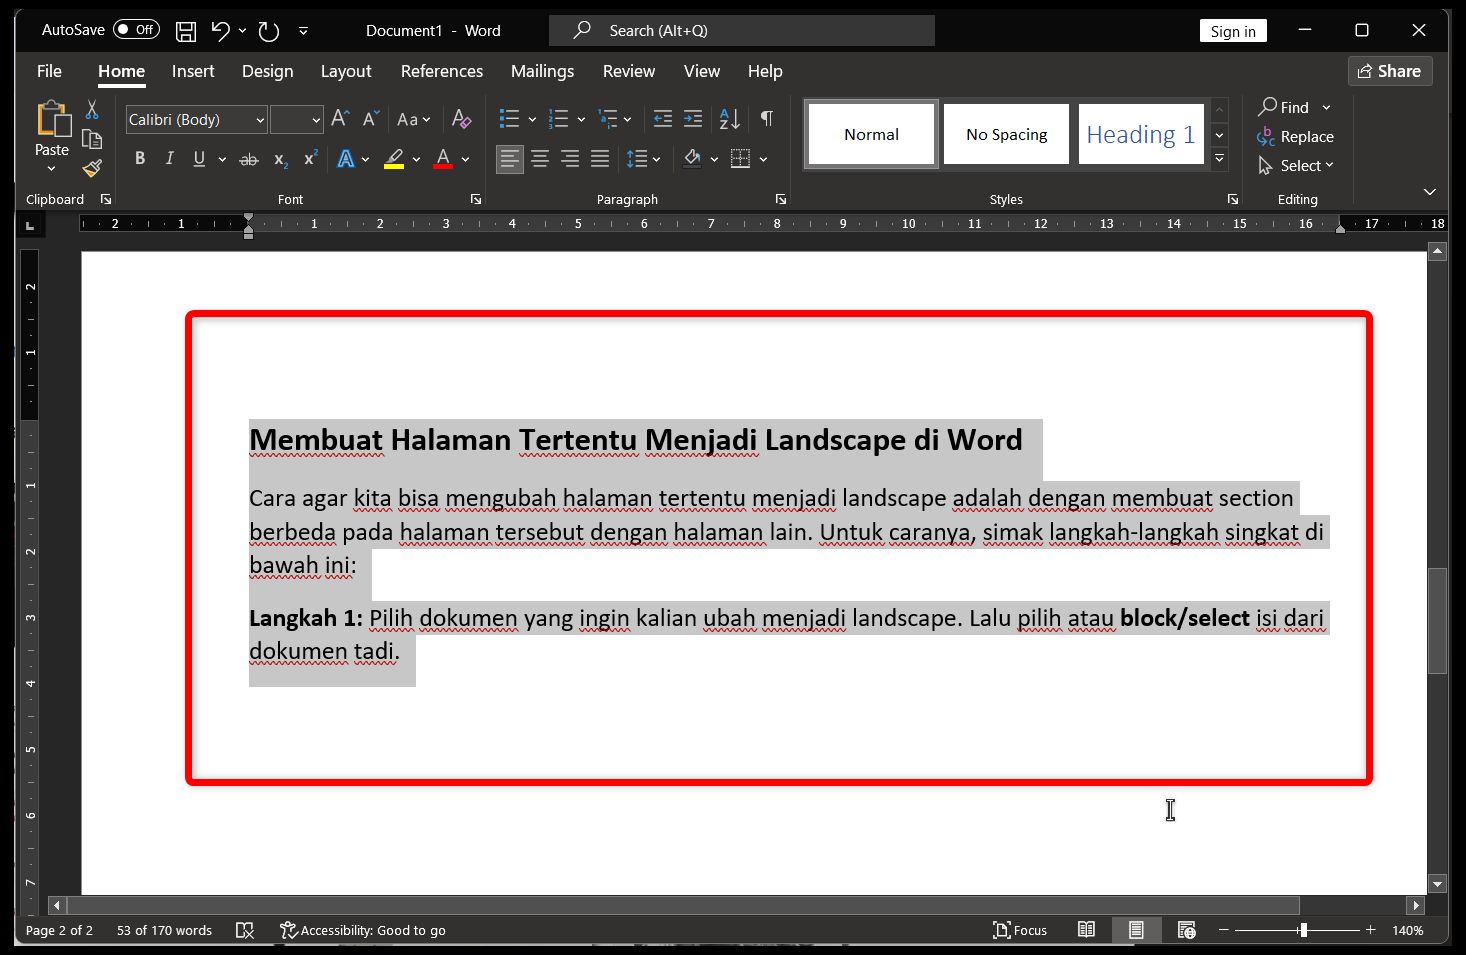 How to Make Certain Pages Landscape in Word